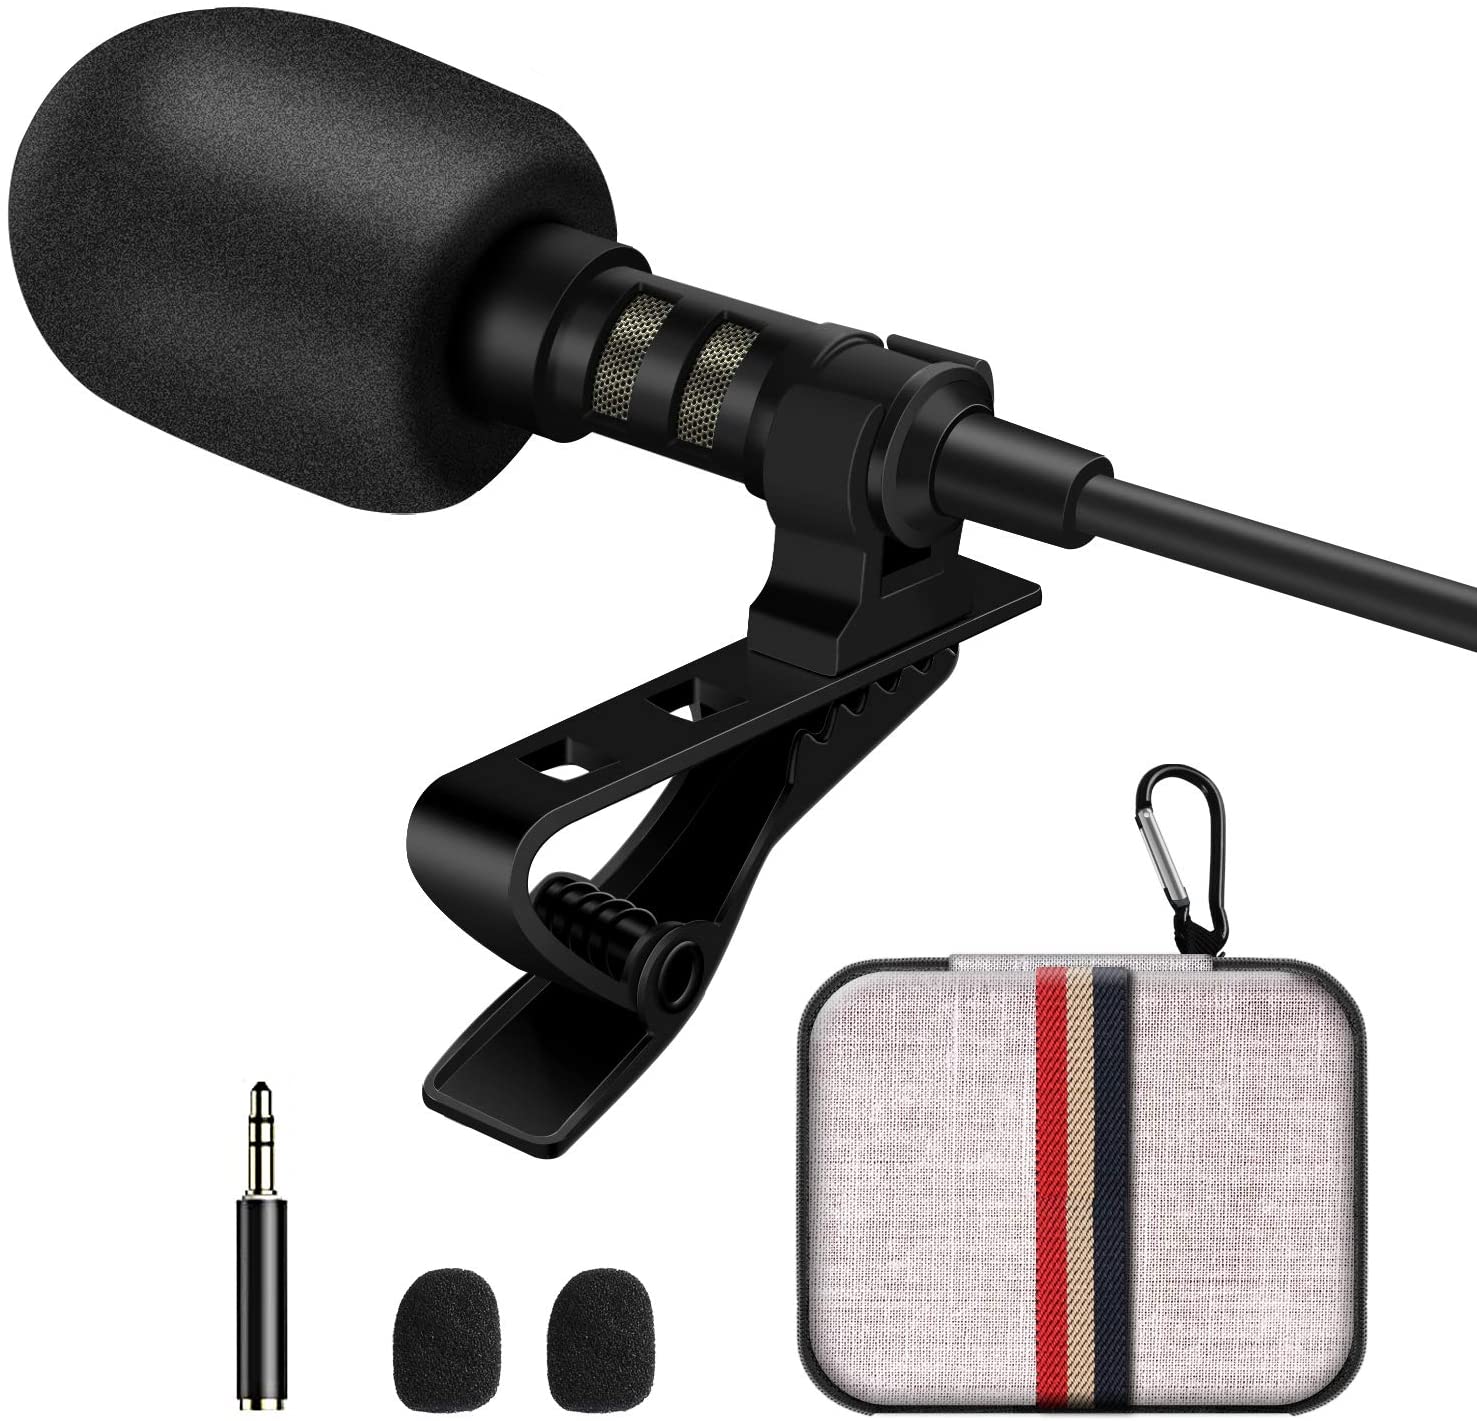 DIGITNOW Voice Professional Lavalier Lapel Microphone Omnidirectional Condenser Mic for iPhone Android Smartphone,Laptop, PC Computer,Recording Mic for Youtube,Interview,Video